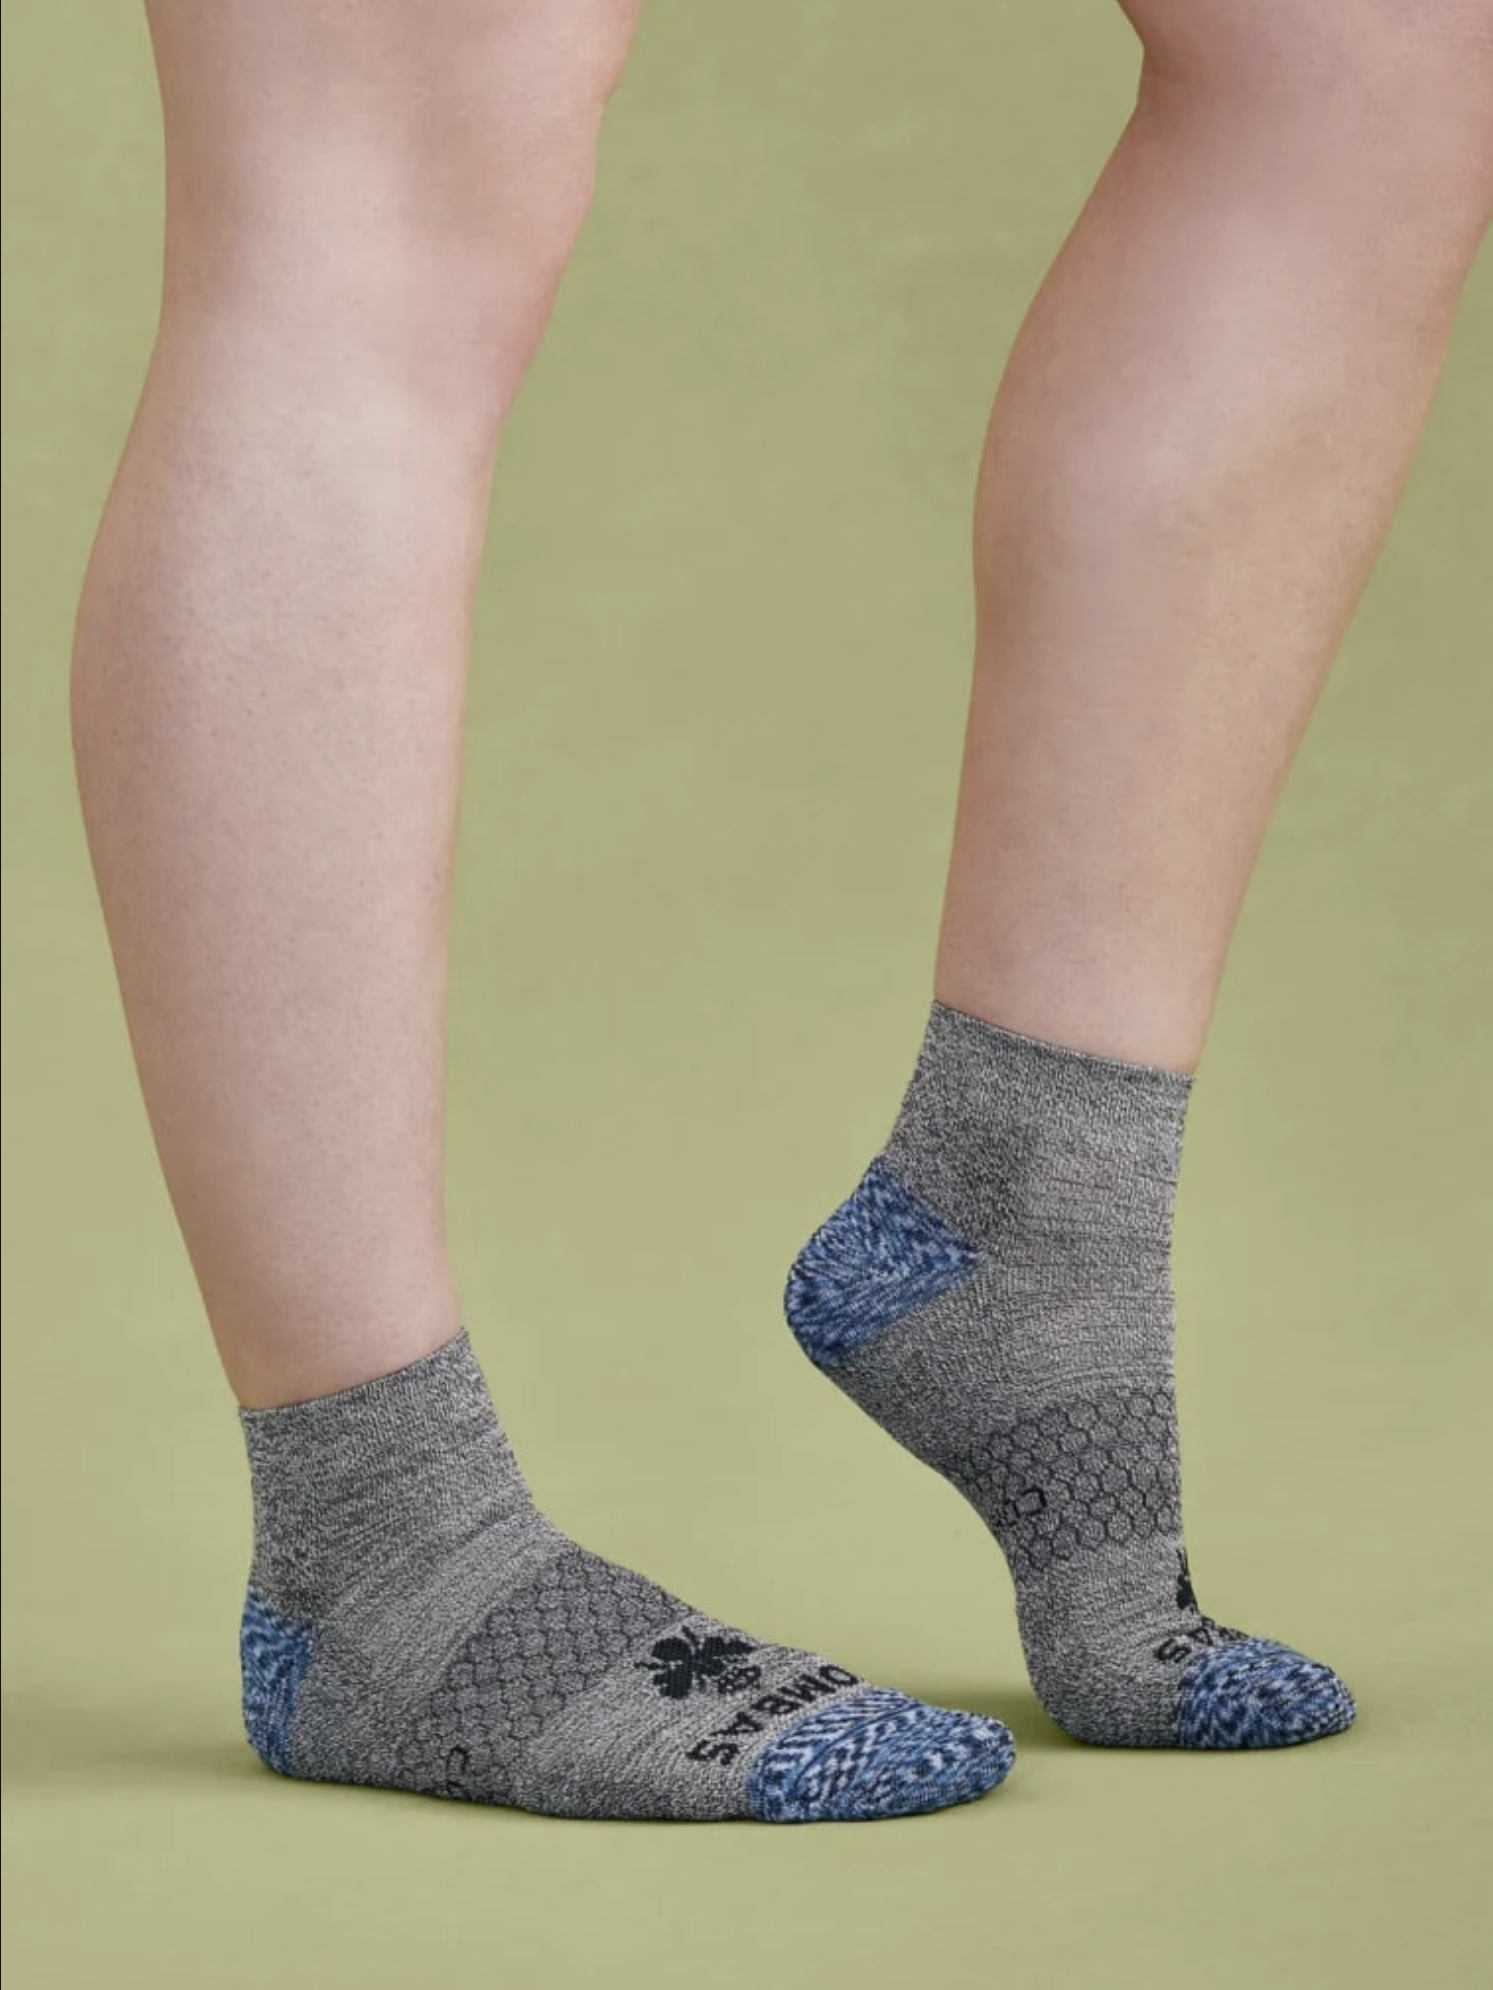 Person wearing gray compression socks with blue toes on a green background.